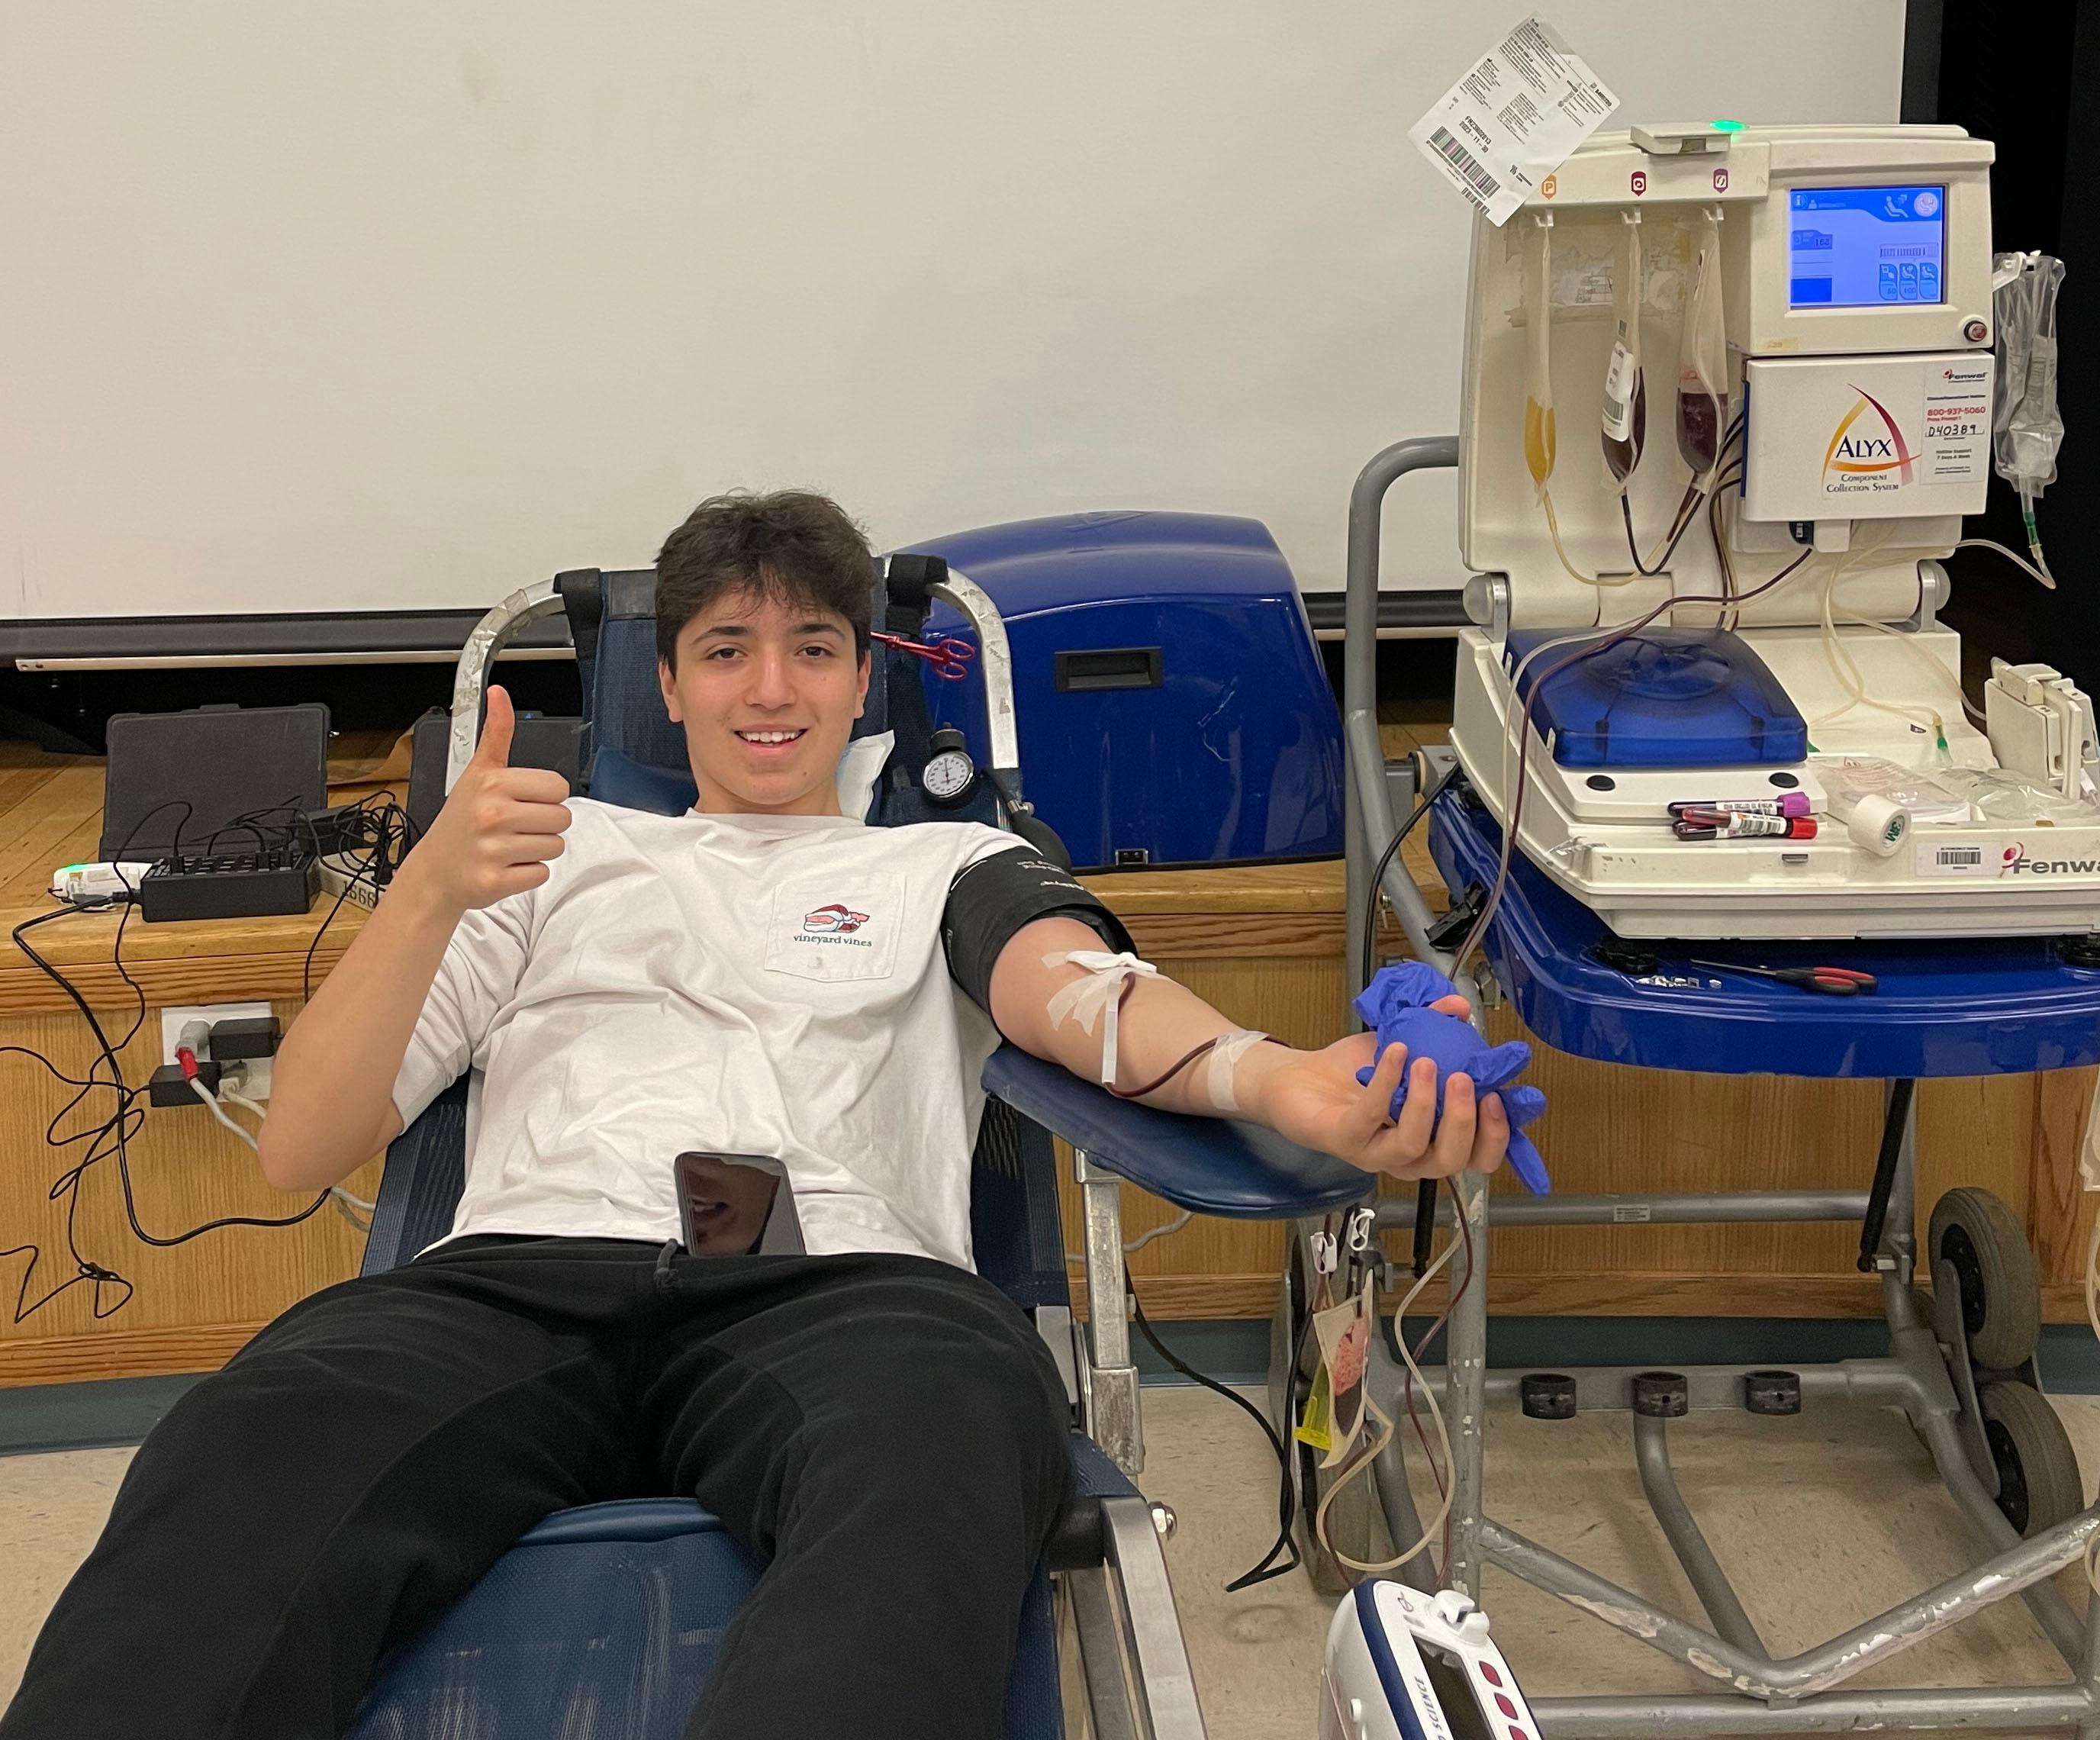 Willowbrook Student Council hosts blood drive for Vitalant